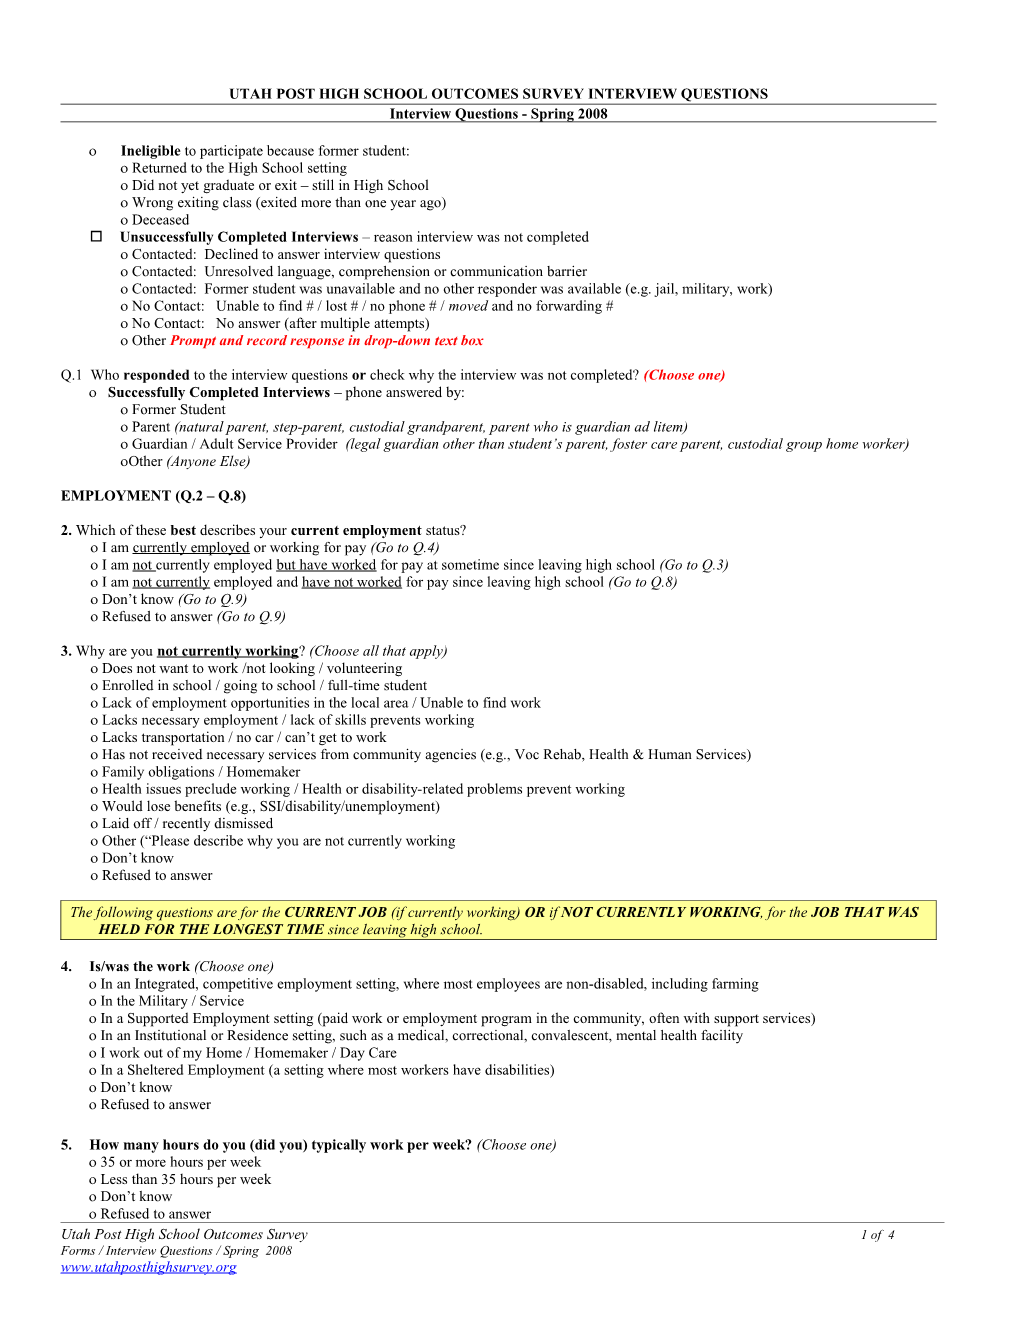 11/11/05 Draft Proposal for Changing Questions to Work with Exit Interview s1